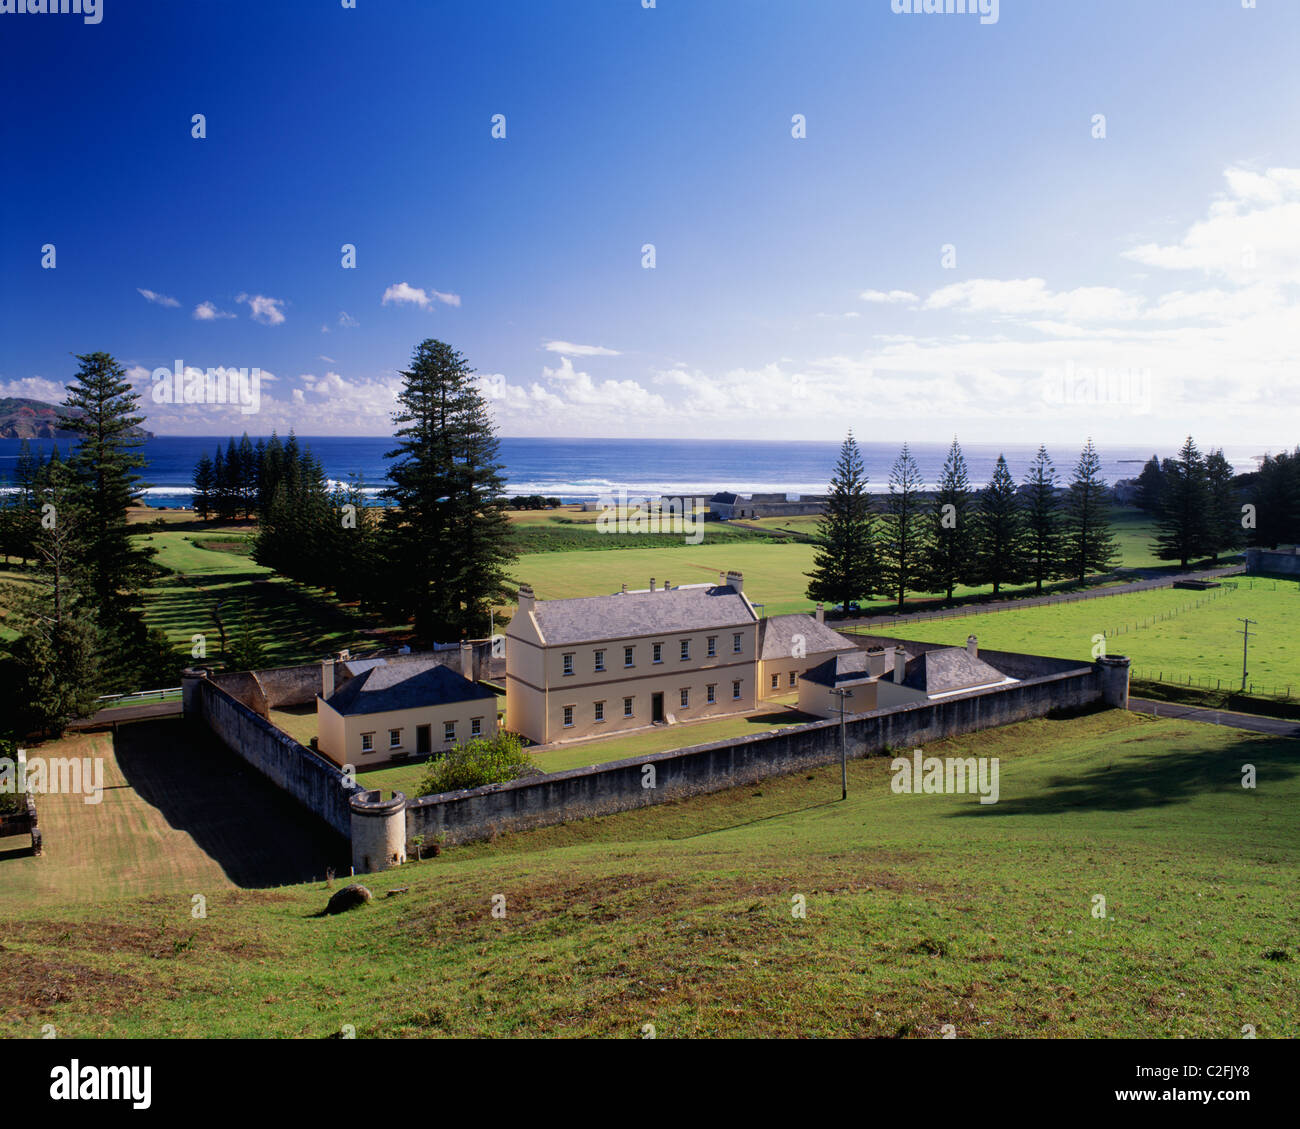 Located between Australia, New Zealand and New Caledonia, Norfolk Island was a British Penal colony from 1788 - 1855. The Stock Photo